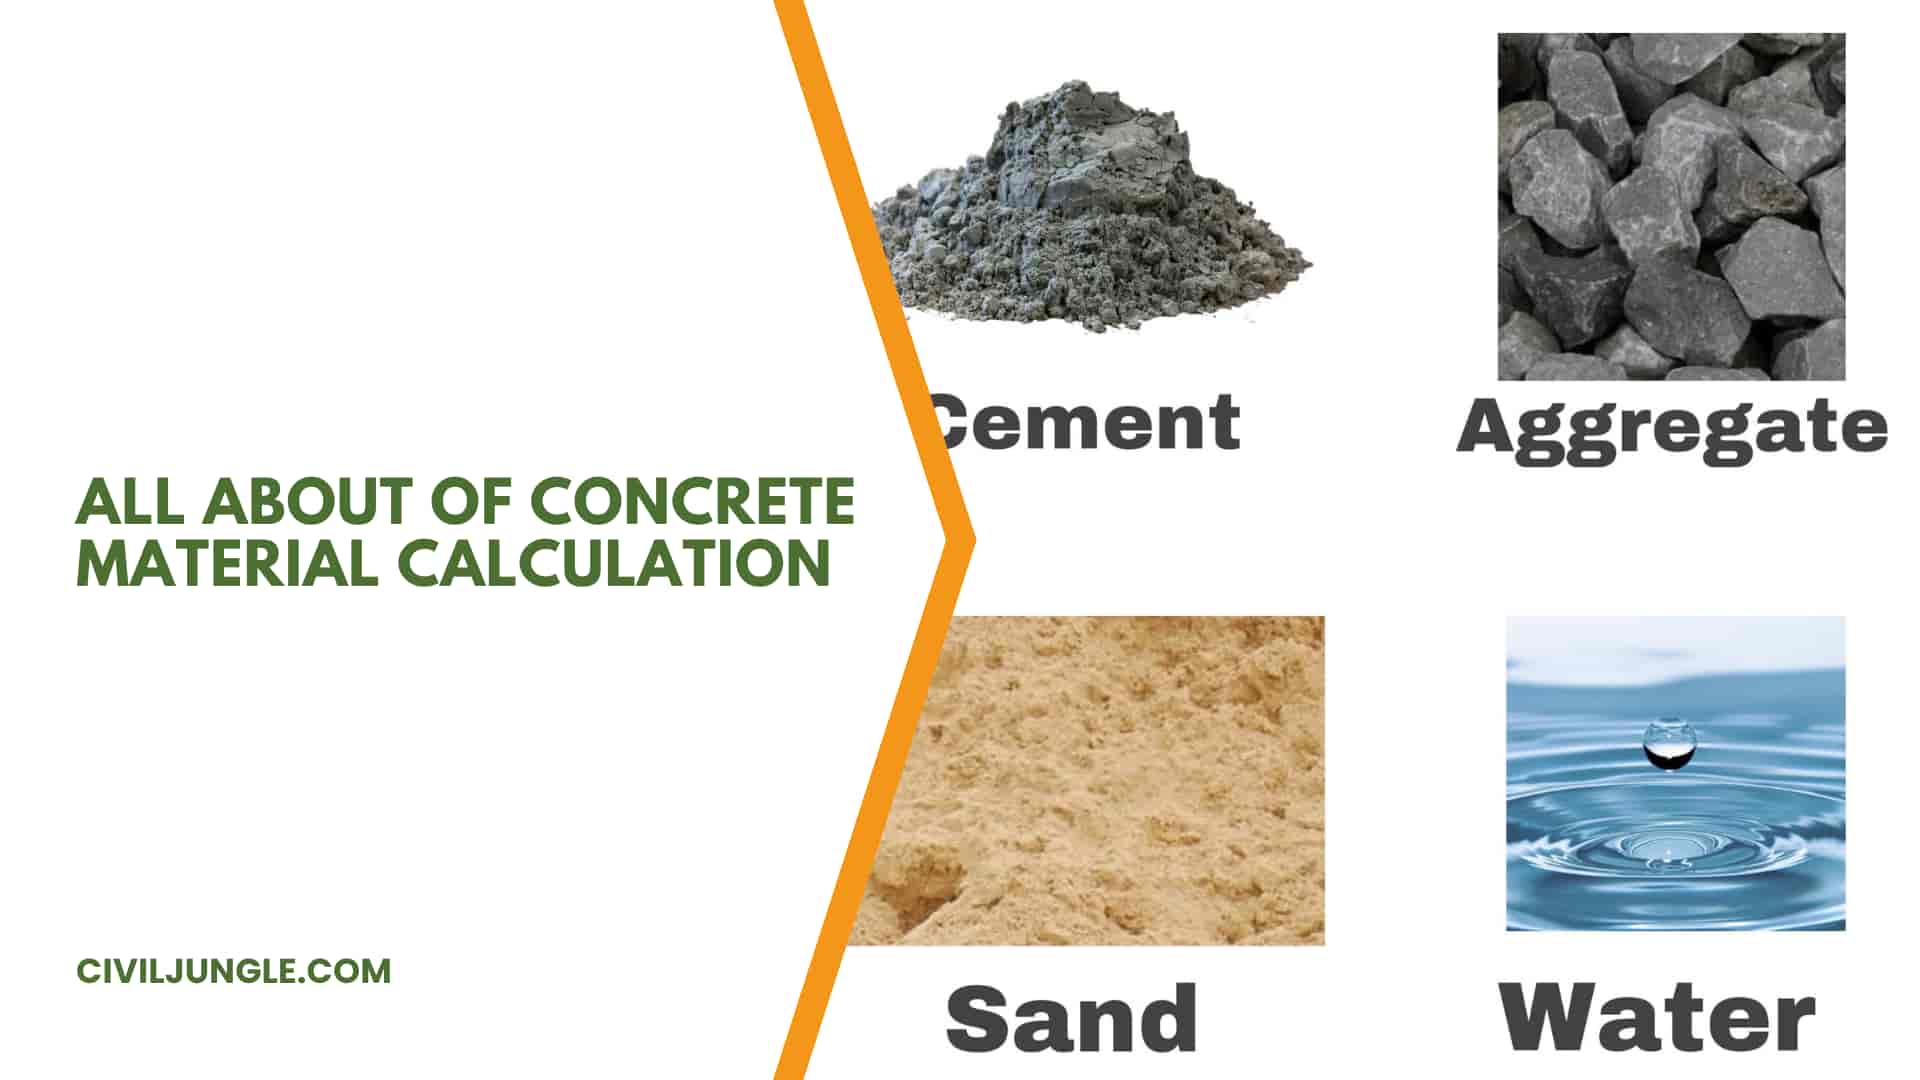 all about of Concrete Material Calculation